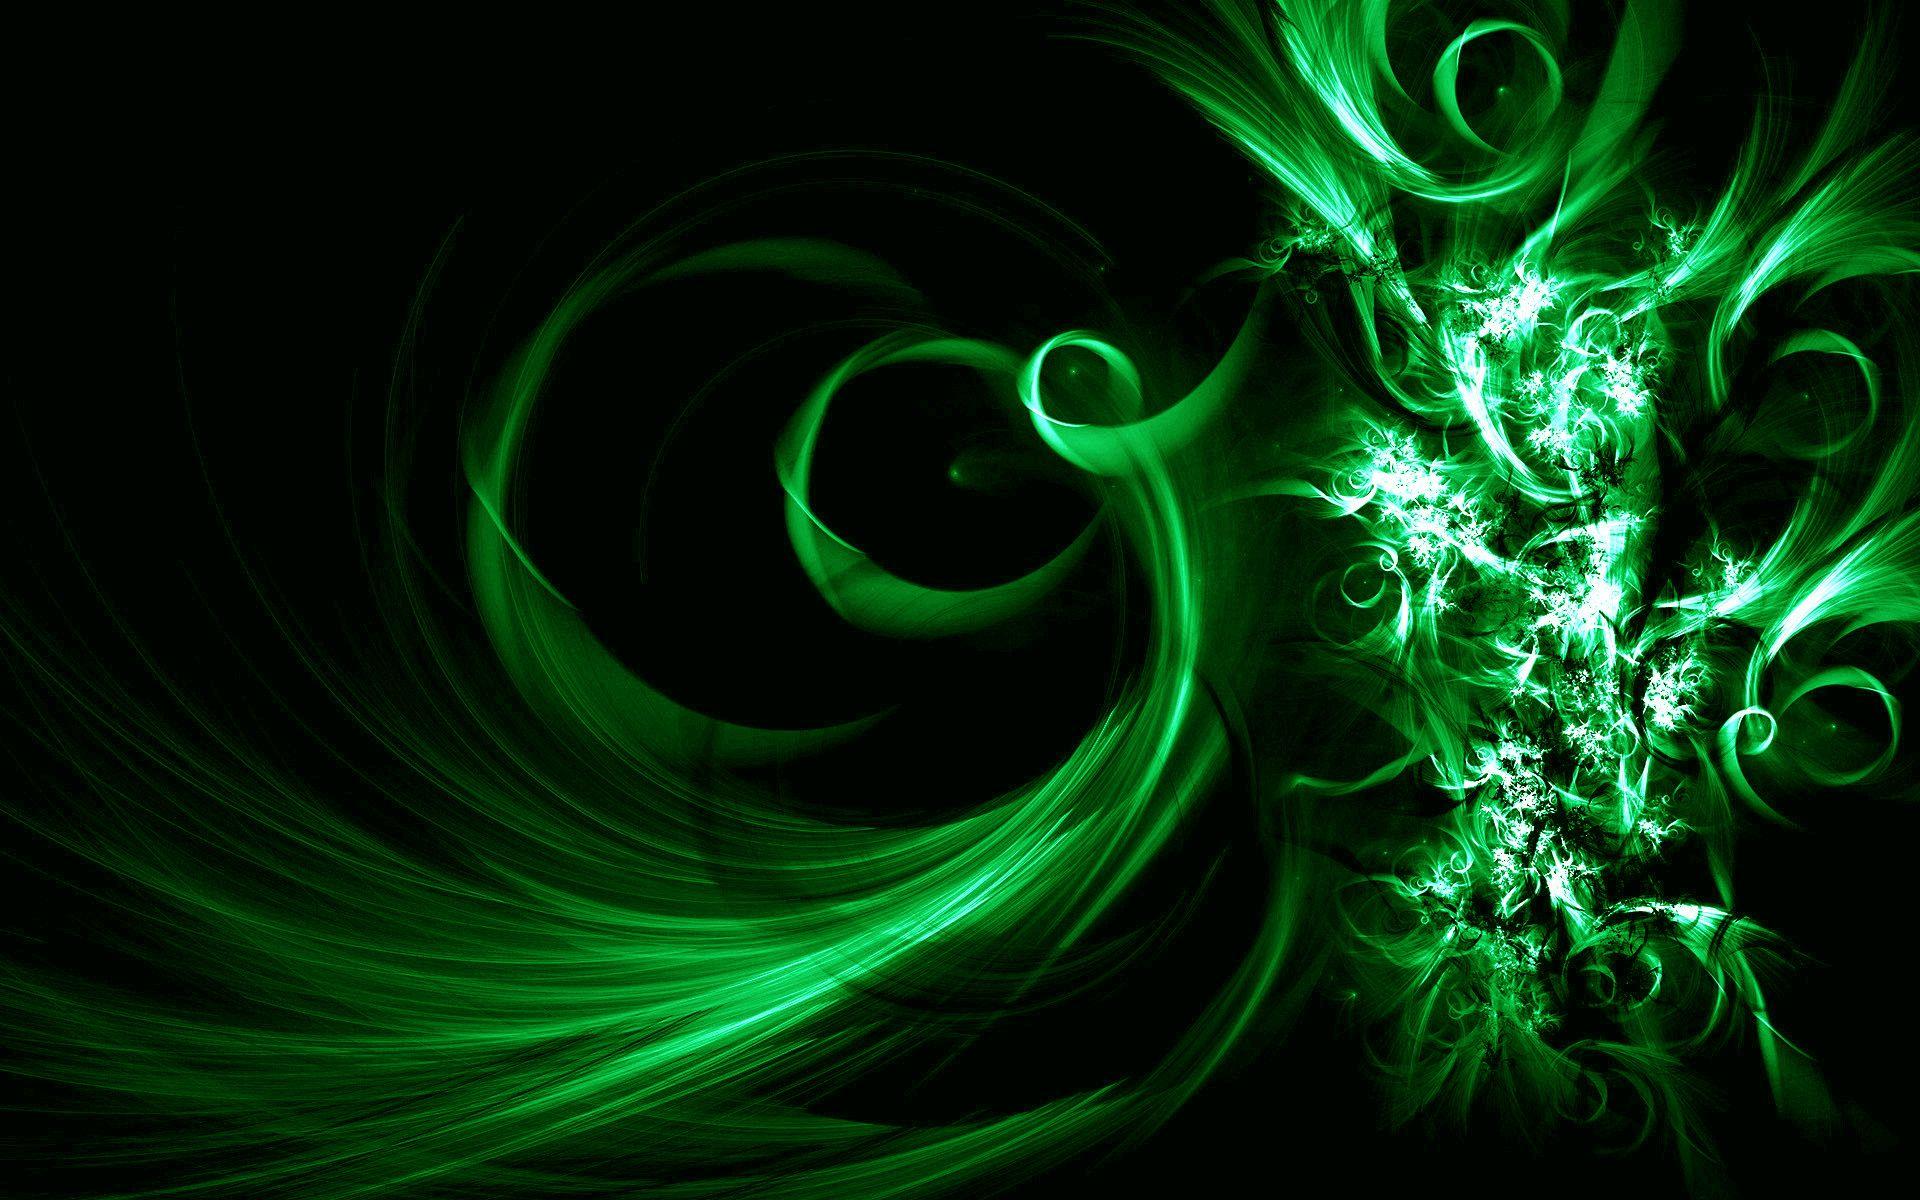 Image Description: This is Black and Green Vector Abstract Desktop